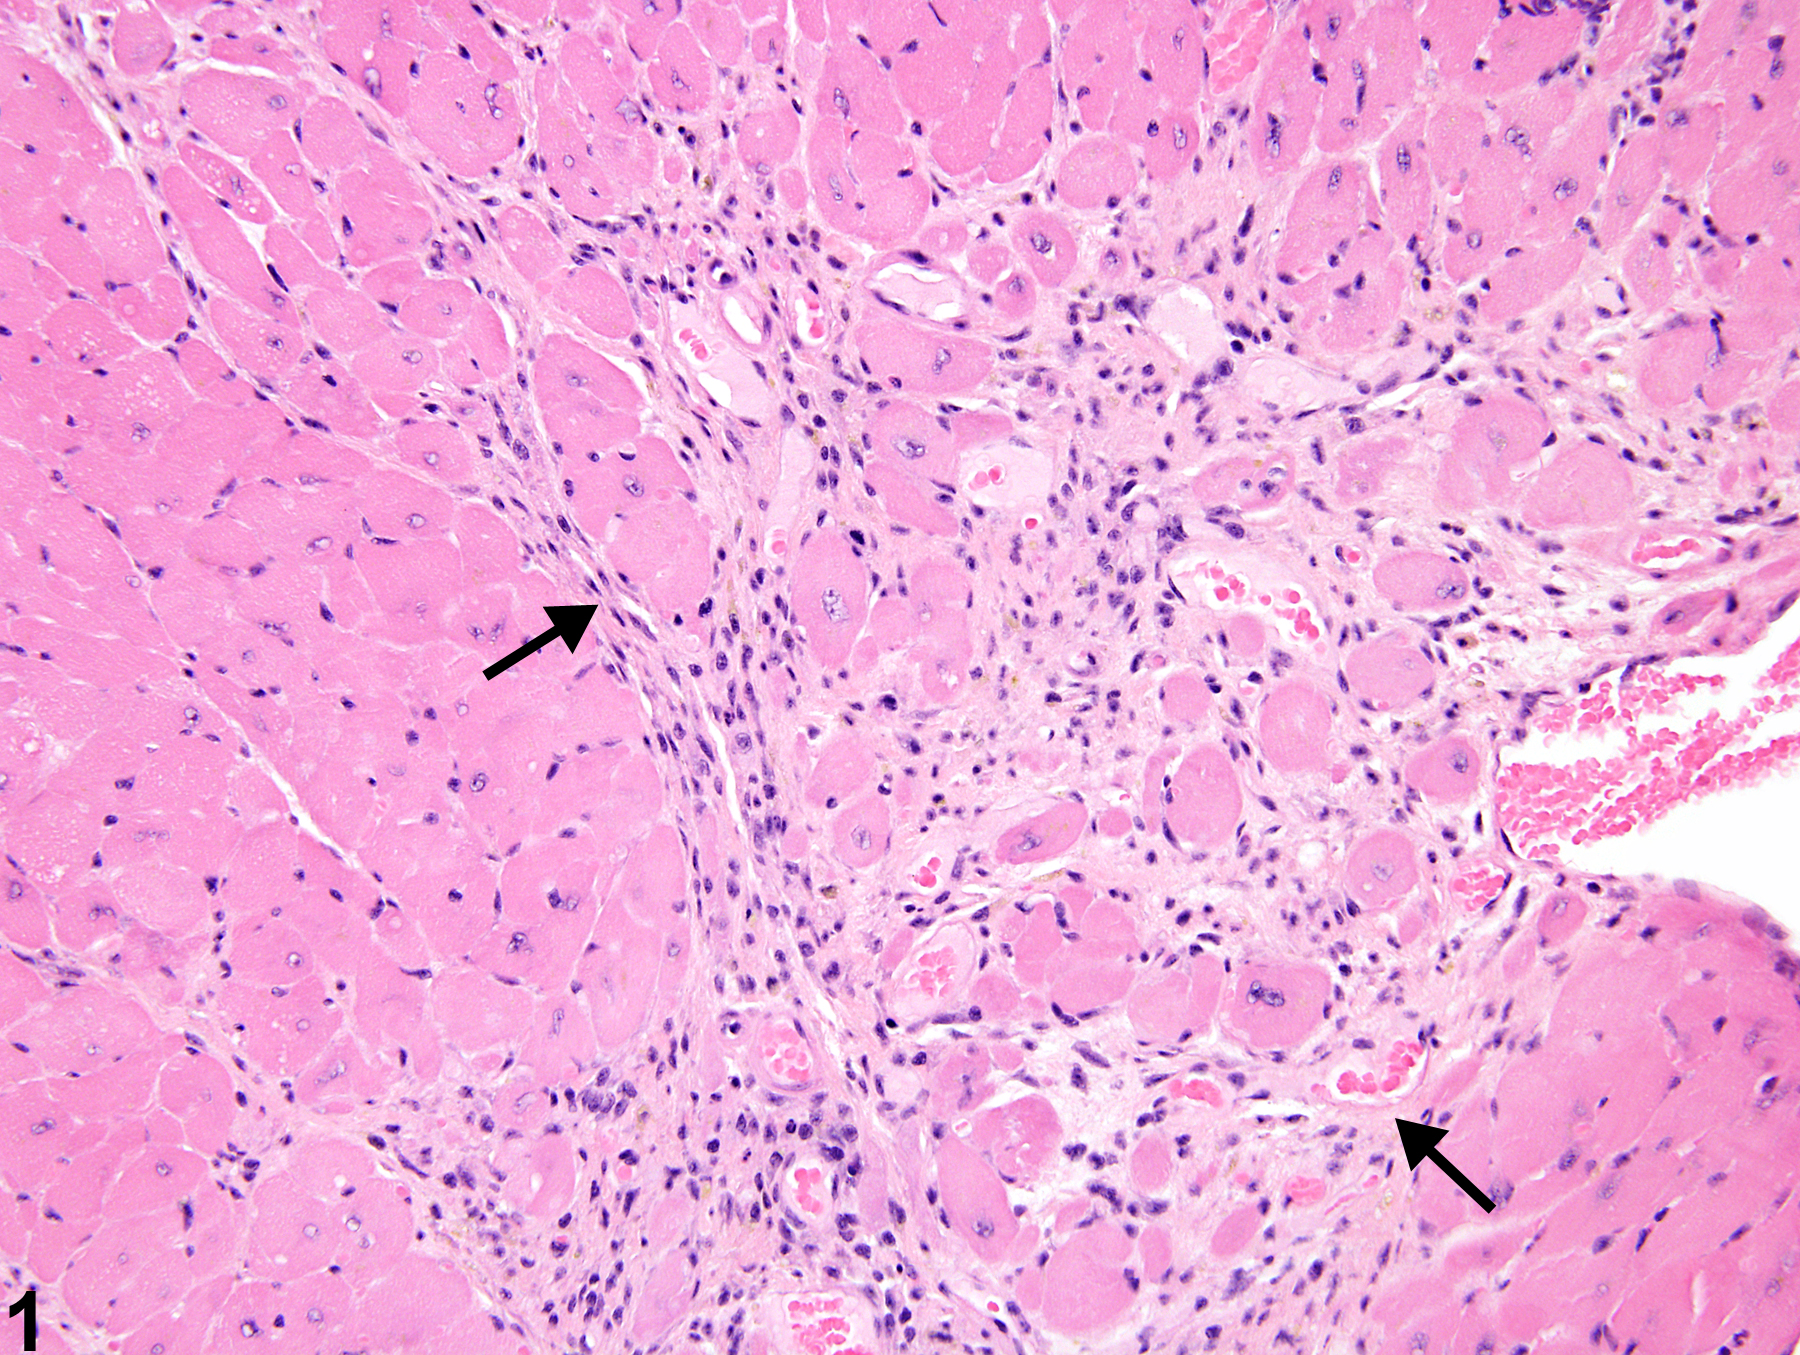 Image of cardiomyopathy in the heart from a male B6C3F1/N mouse in a chronic study